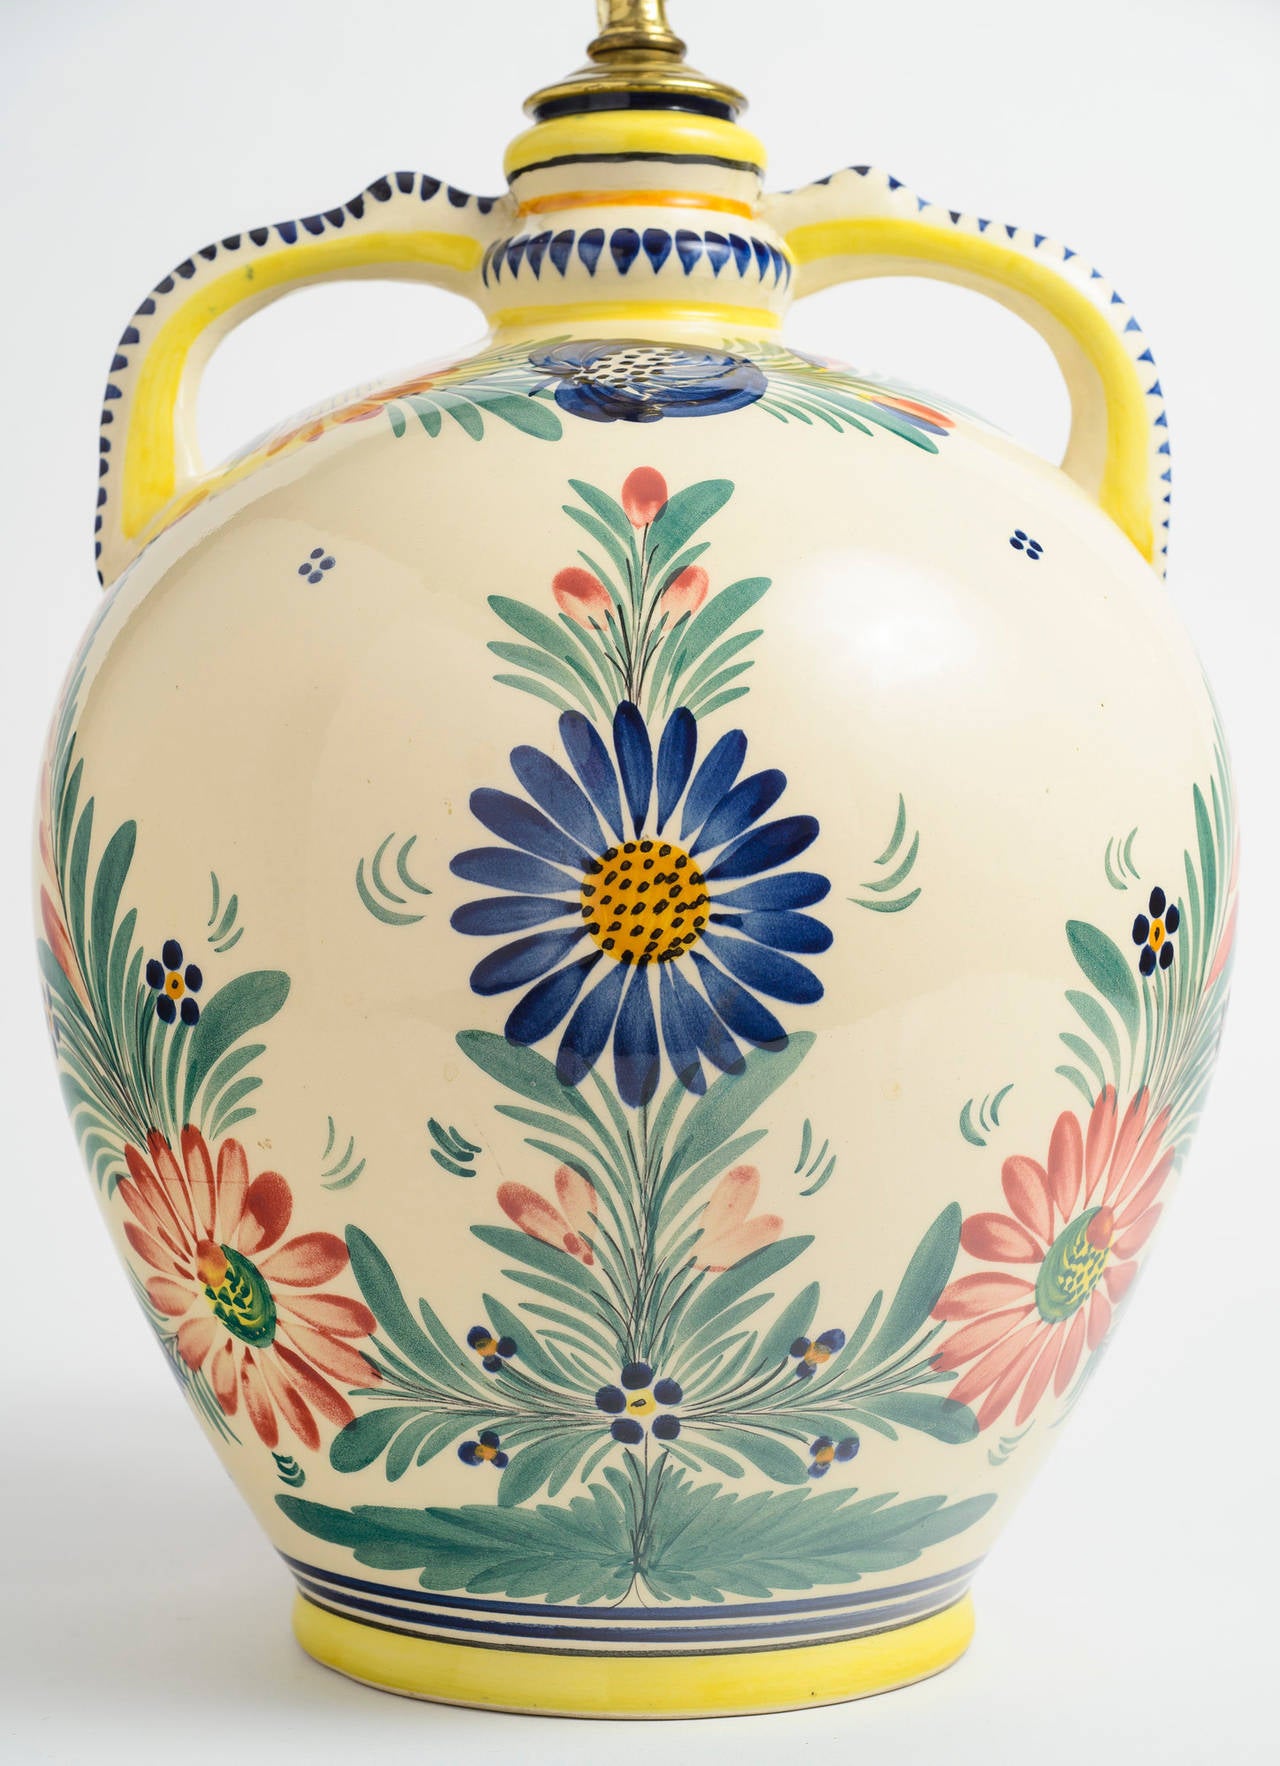 Large hand painted two handled jar, signed HB Quimper 531.  The bright colors are clear and fully surround the ceramic piece.  It has be made into a lamp with American wiring.  The jar is has not been drilled.    